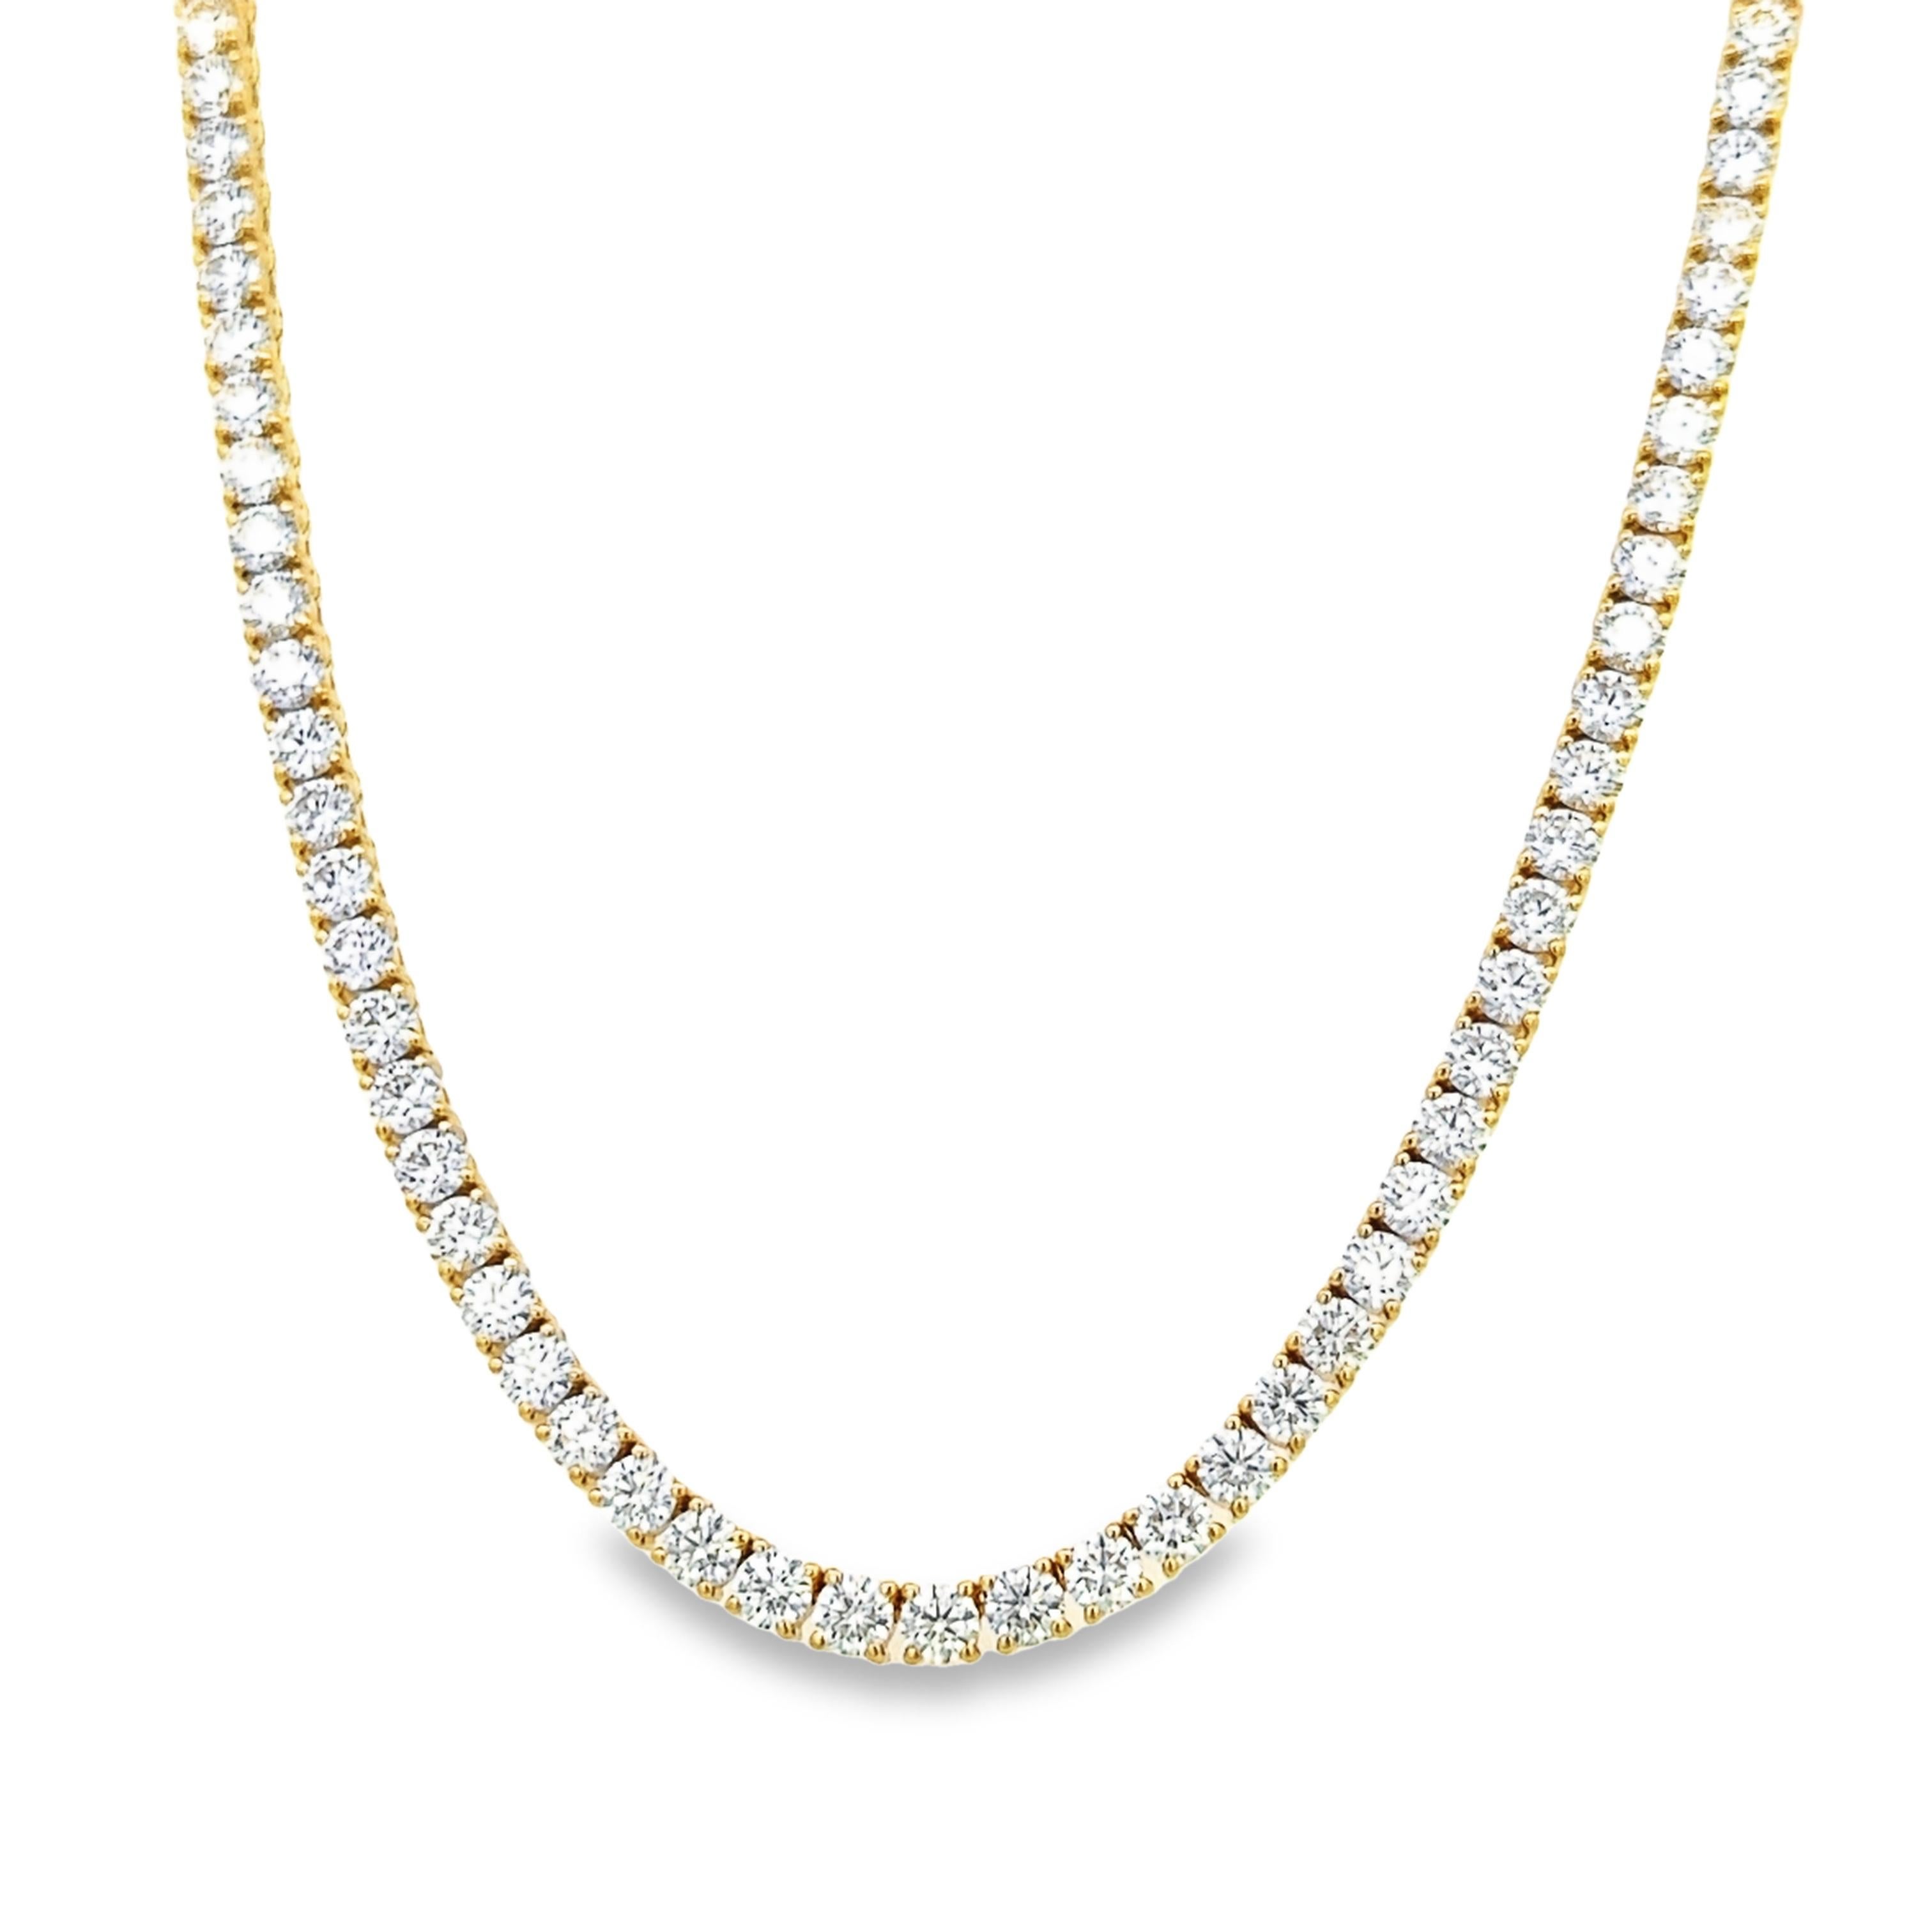 Beautiful and classic diamond tennis riviera necklace, by Alexander Beverly Hills.
125 round brilliant diamonds, 22.77 carats. Approximately H color and VS clarity. 18k yellow gold, 33.47 grams, 18.25in.
Accommodated with an up-to-date digital